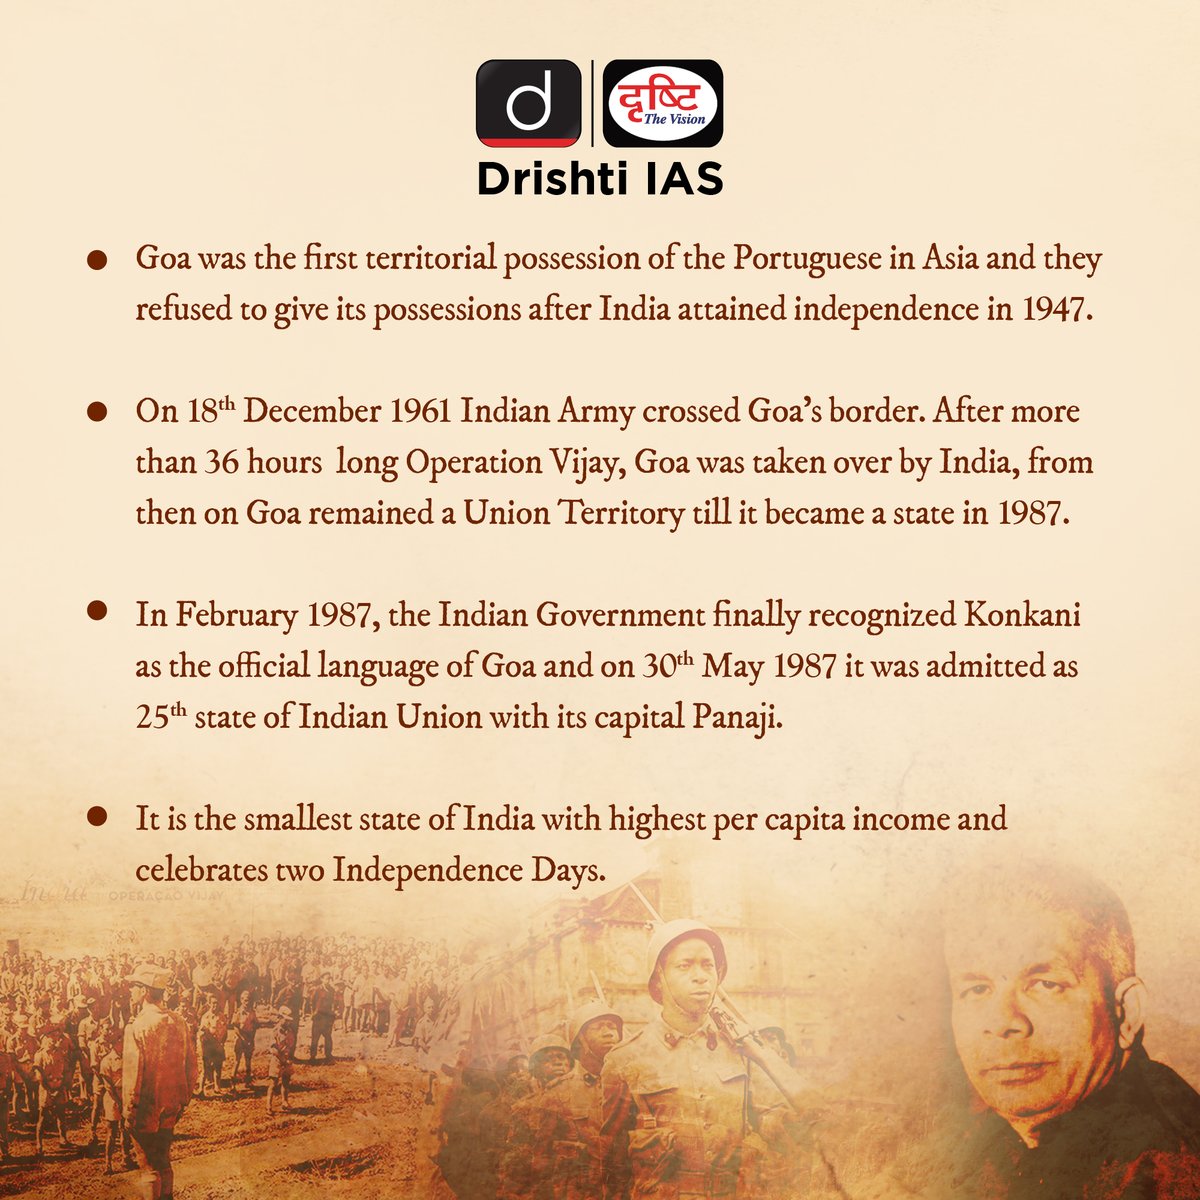 Take a glimpse into the #Past with us by remembering the #Events, #Achievements, and milestones that shaped our nation's #History with #TodayInIndianHistory

#DrishtiGuideToGS #Goa #State #Ancient #MayEvents #IndianHistory #UPSC #UPSC2023 #IAS #CSE #DrishtiIAS #DrishtiIASEnglish